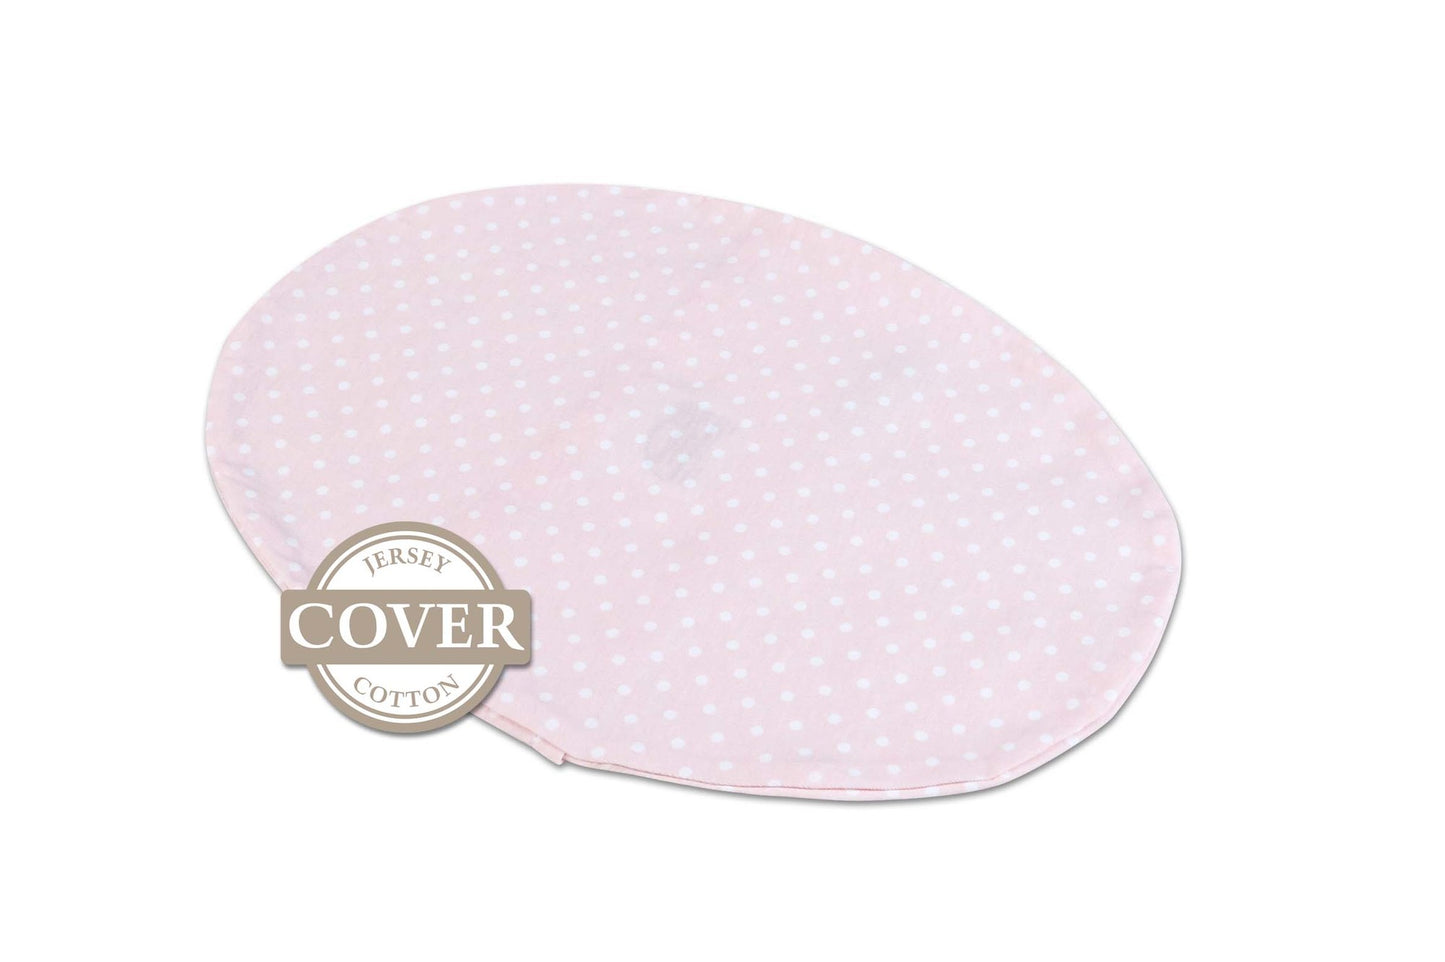 Comfy Baby Cooling Purotex Dimple Pillow and Cover